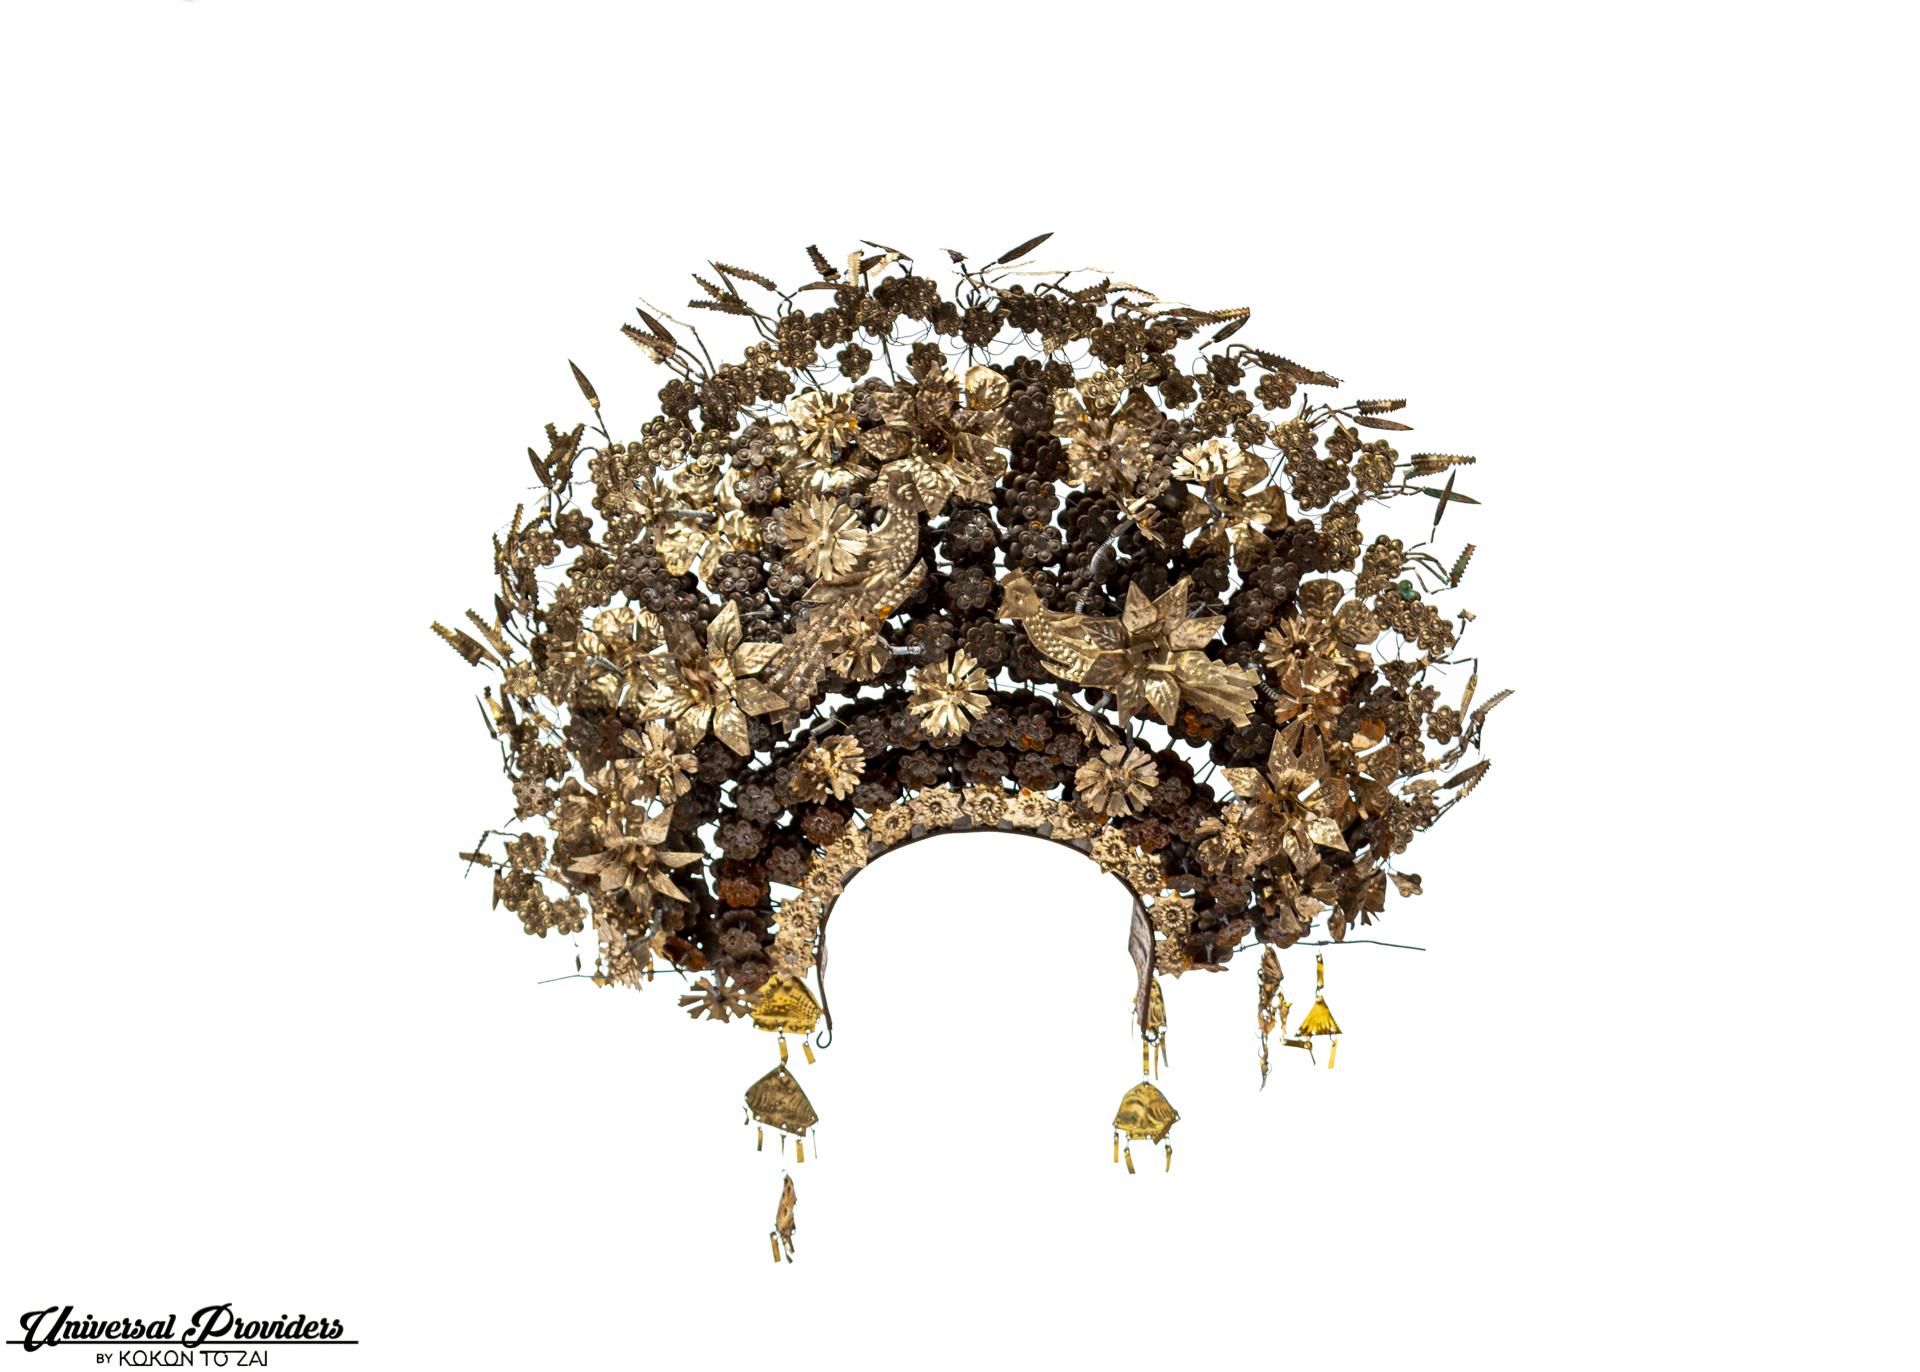 A ceremonial headdress worn by Balinese Brides, Which were passed down by earlier generations. Made of Tin, Bronze and other Light Metals, despite the larger footprint, they are extremely light. They are in perfect shape and condition. This Bridal